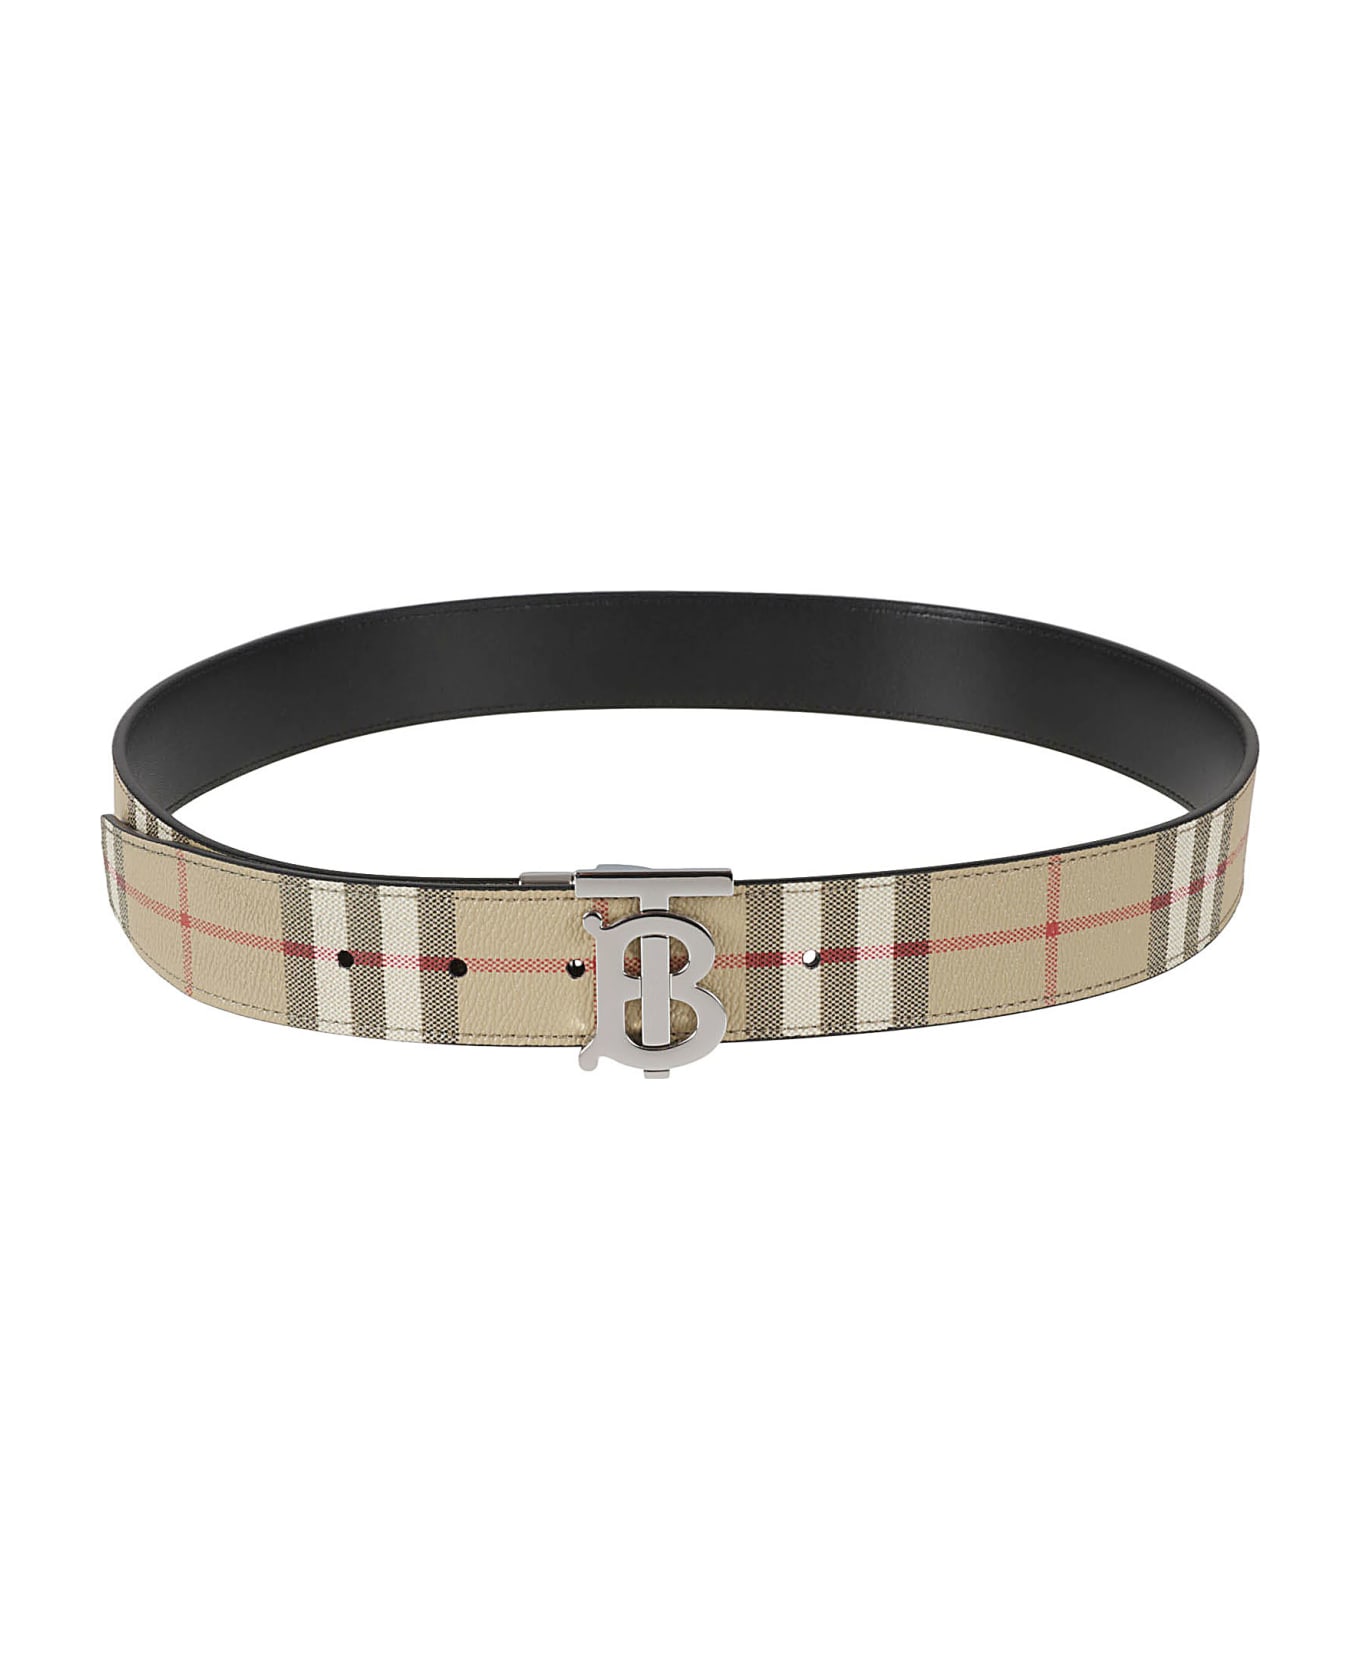 Burberry Tb Buckled Check Belt - Beige